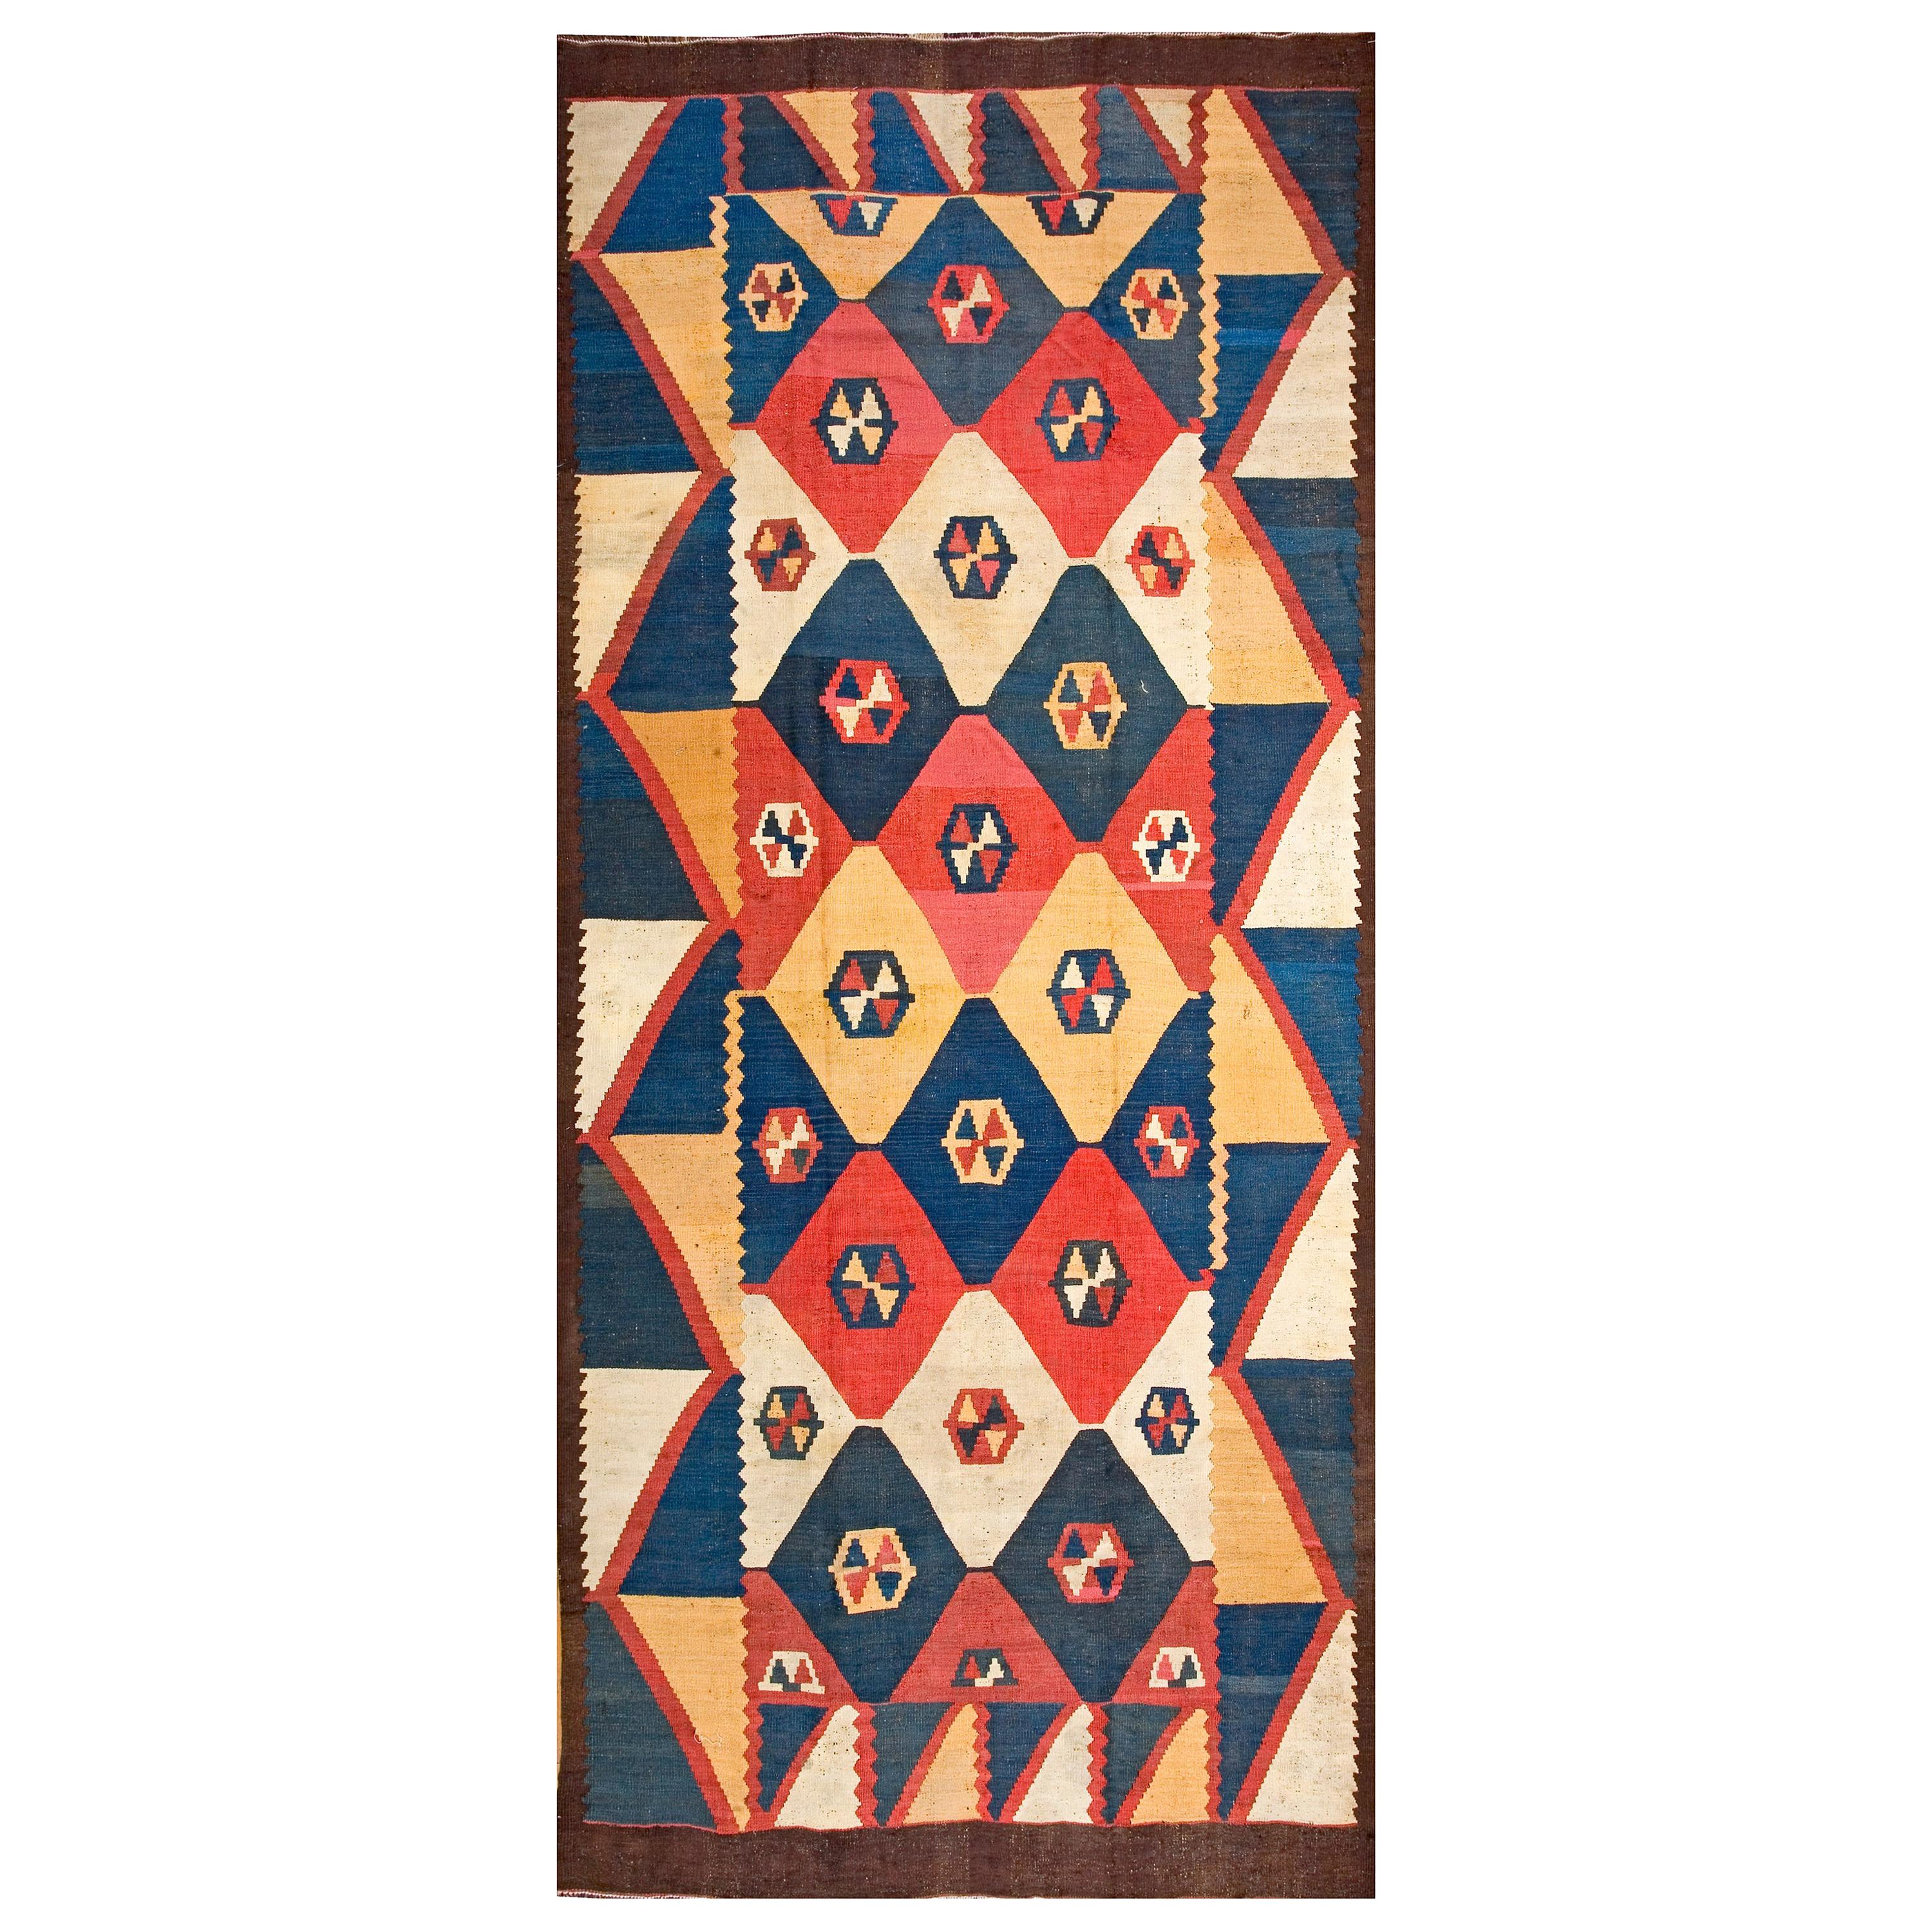 Early 20th Century Central Asian Tajik Flat-Weave ( 6'8" x 15'8" - 203 x 478 ) For Sale